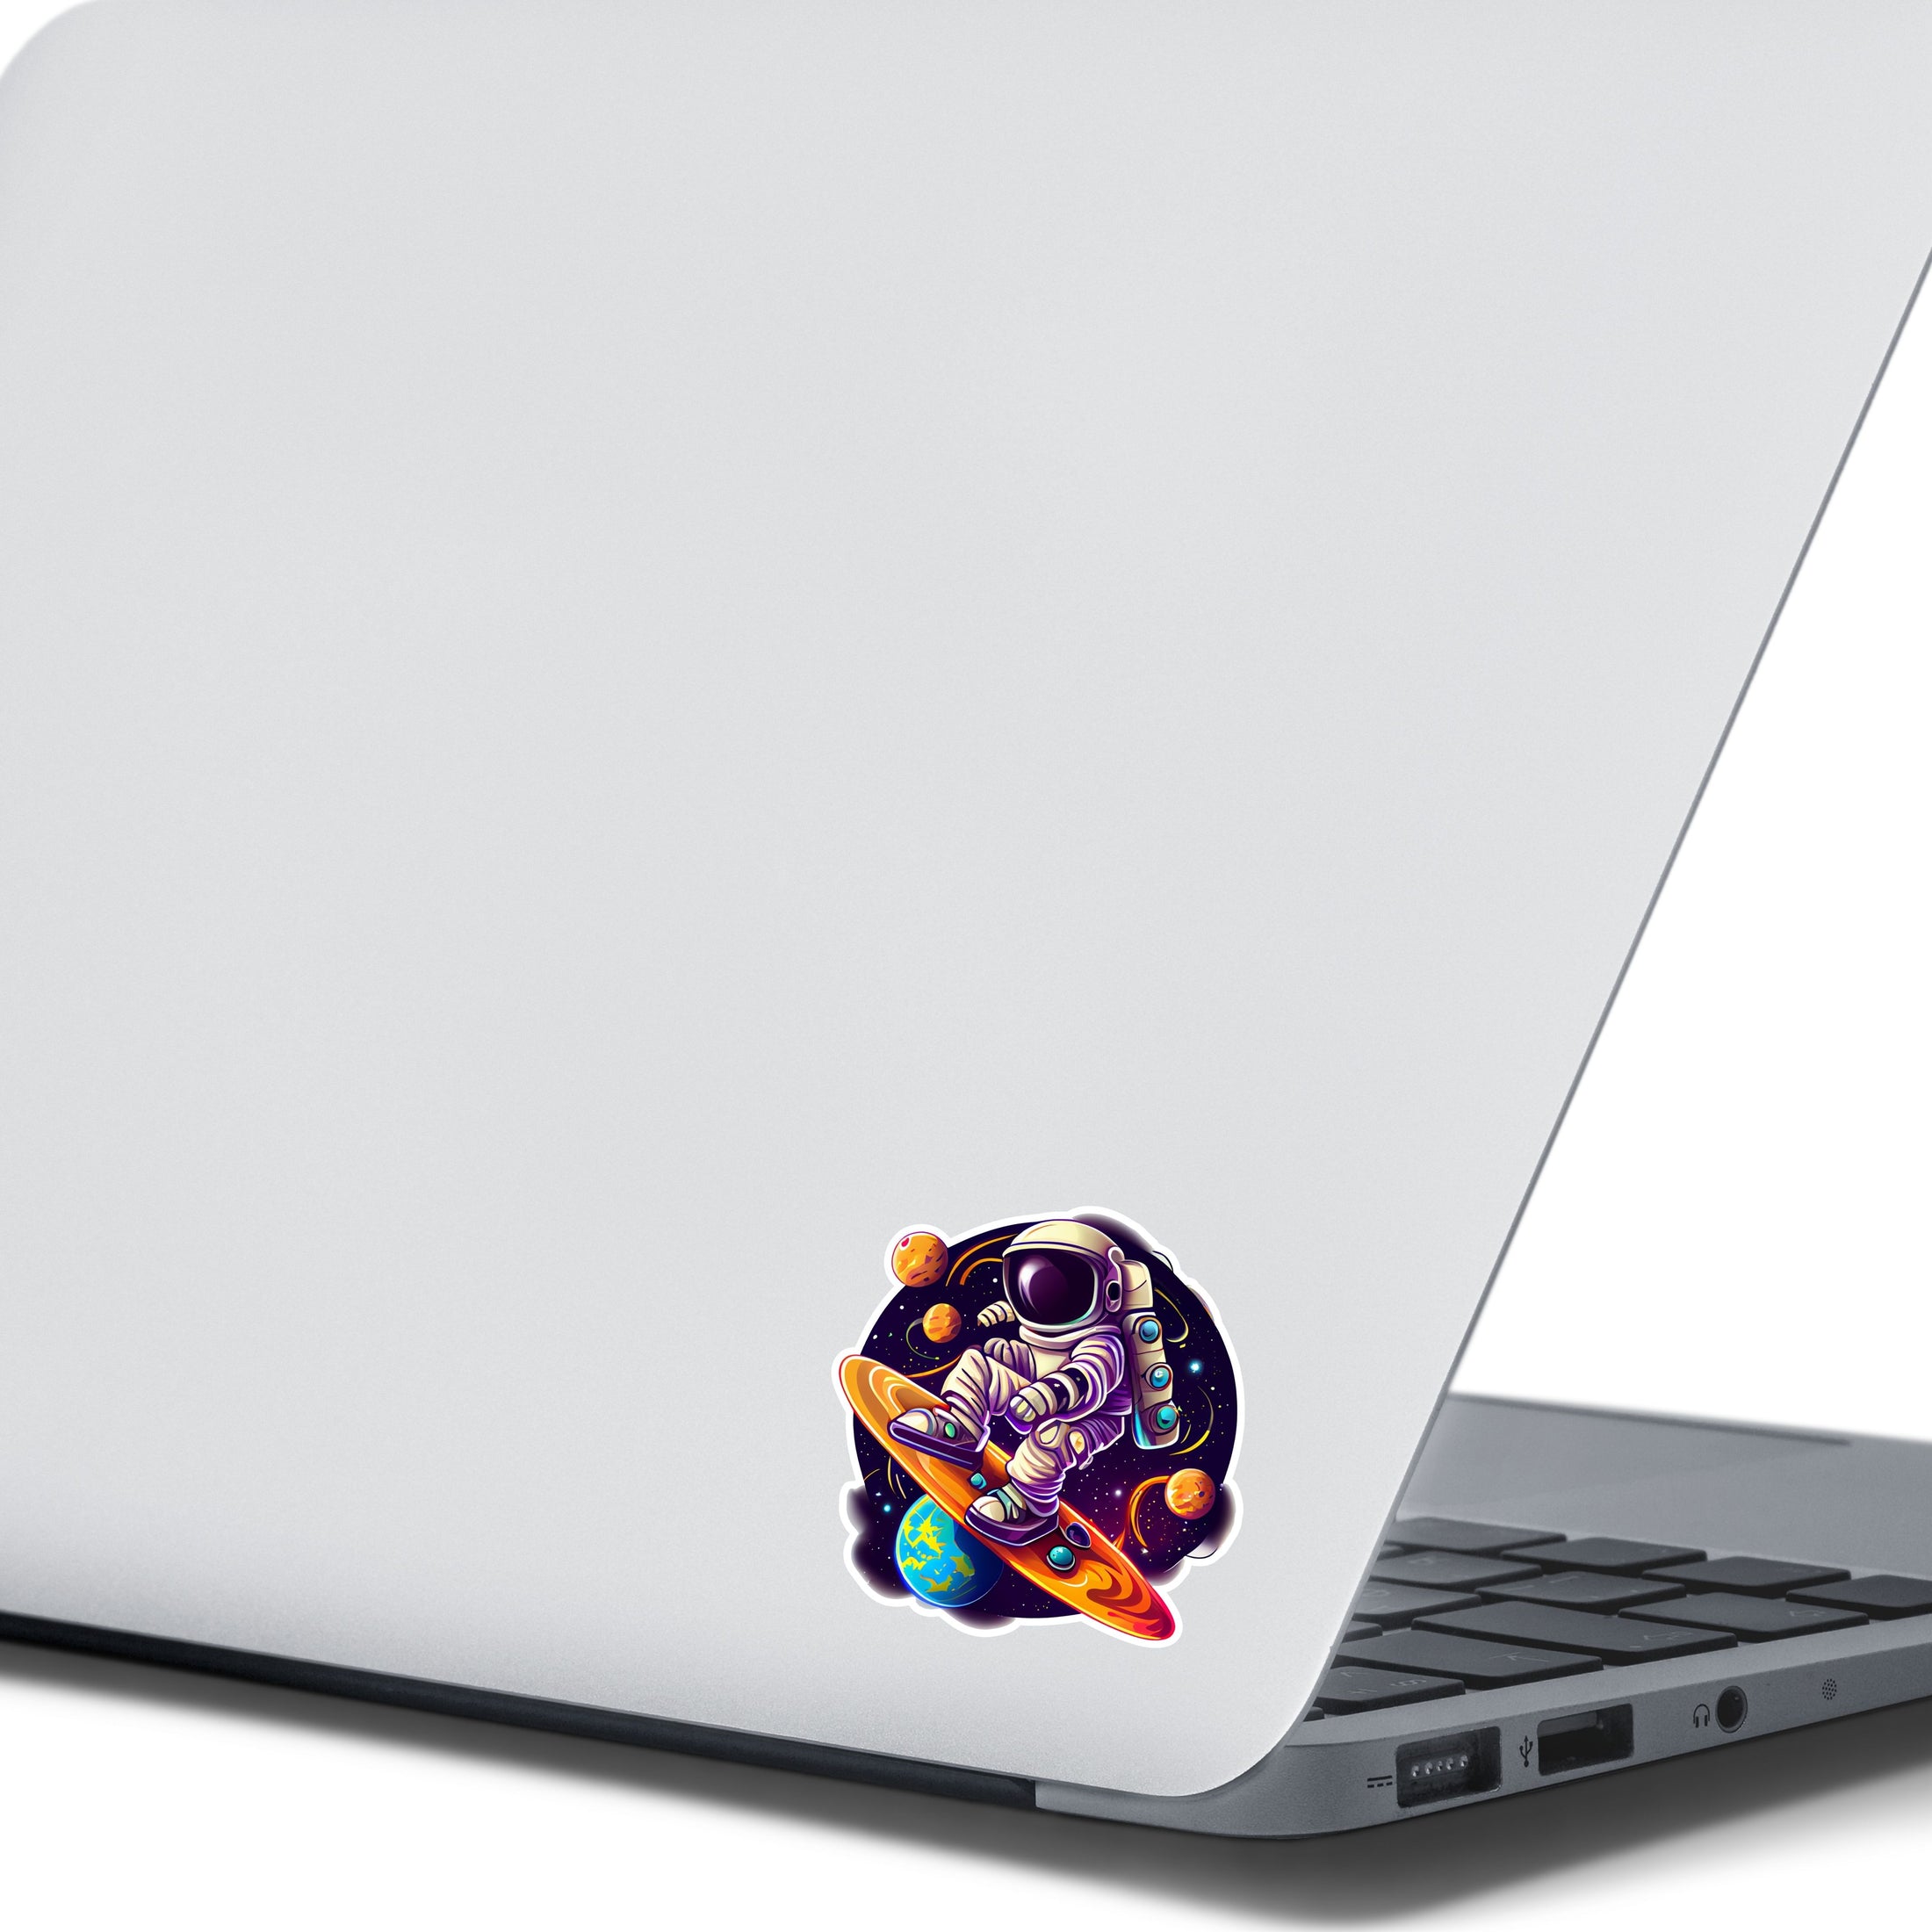 This image shows the astronaut surfing sticker on the back of an open laptop.